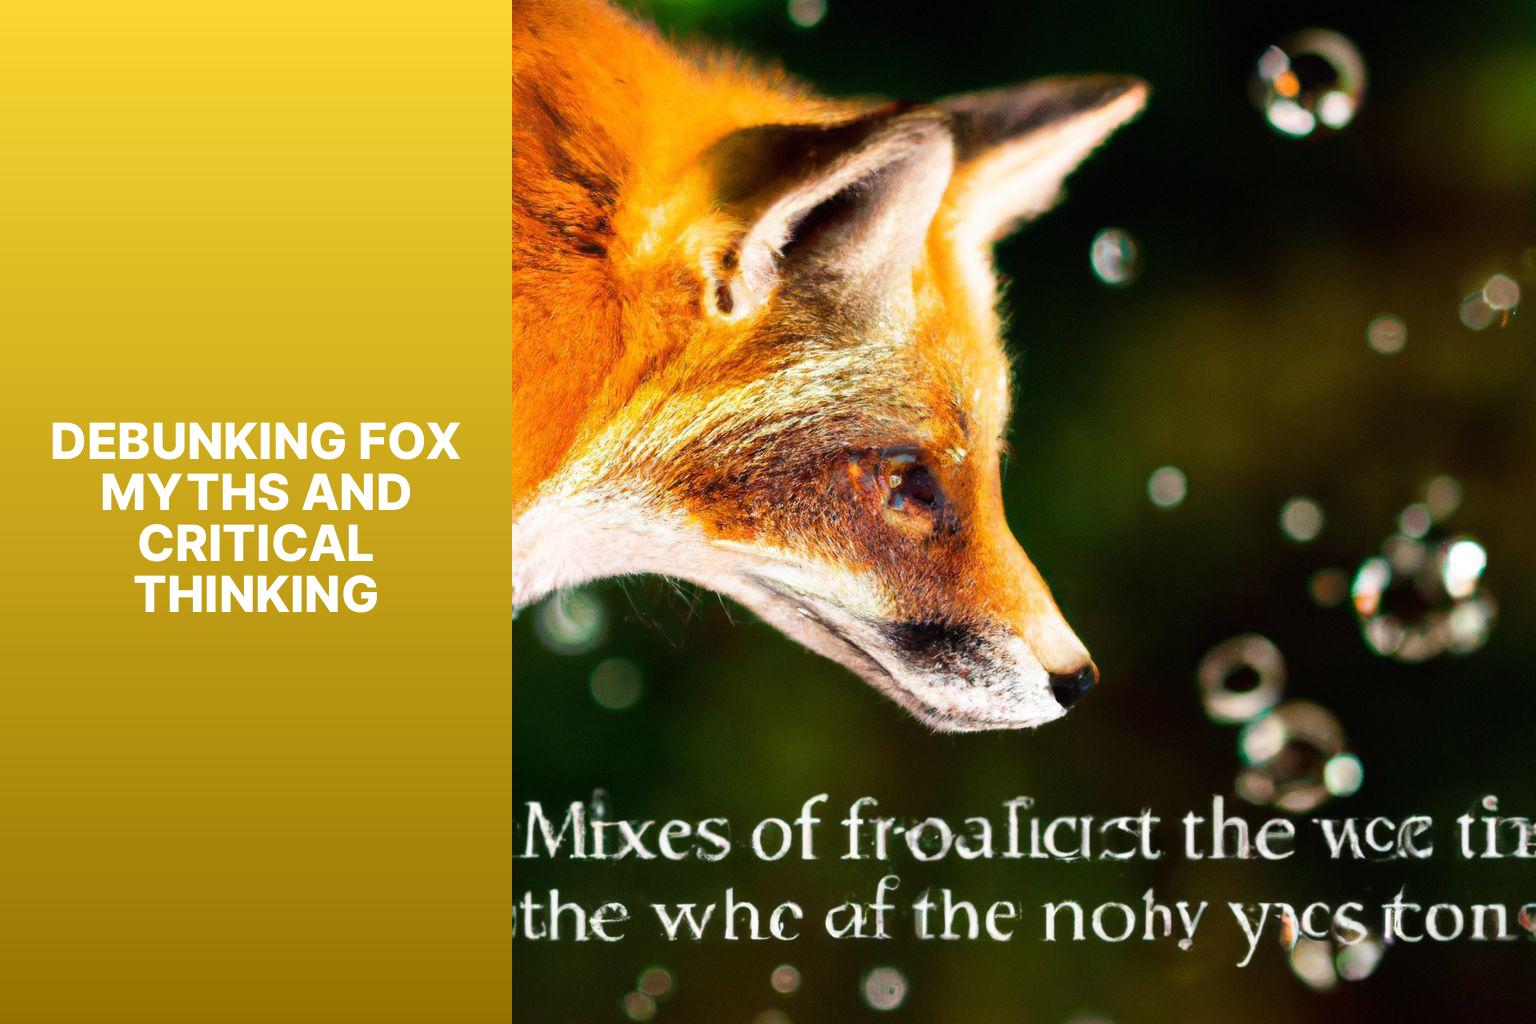 Debunking Fox Myths and Critical Thinking - Fox Myths in Conspiracy Theories 